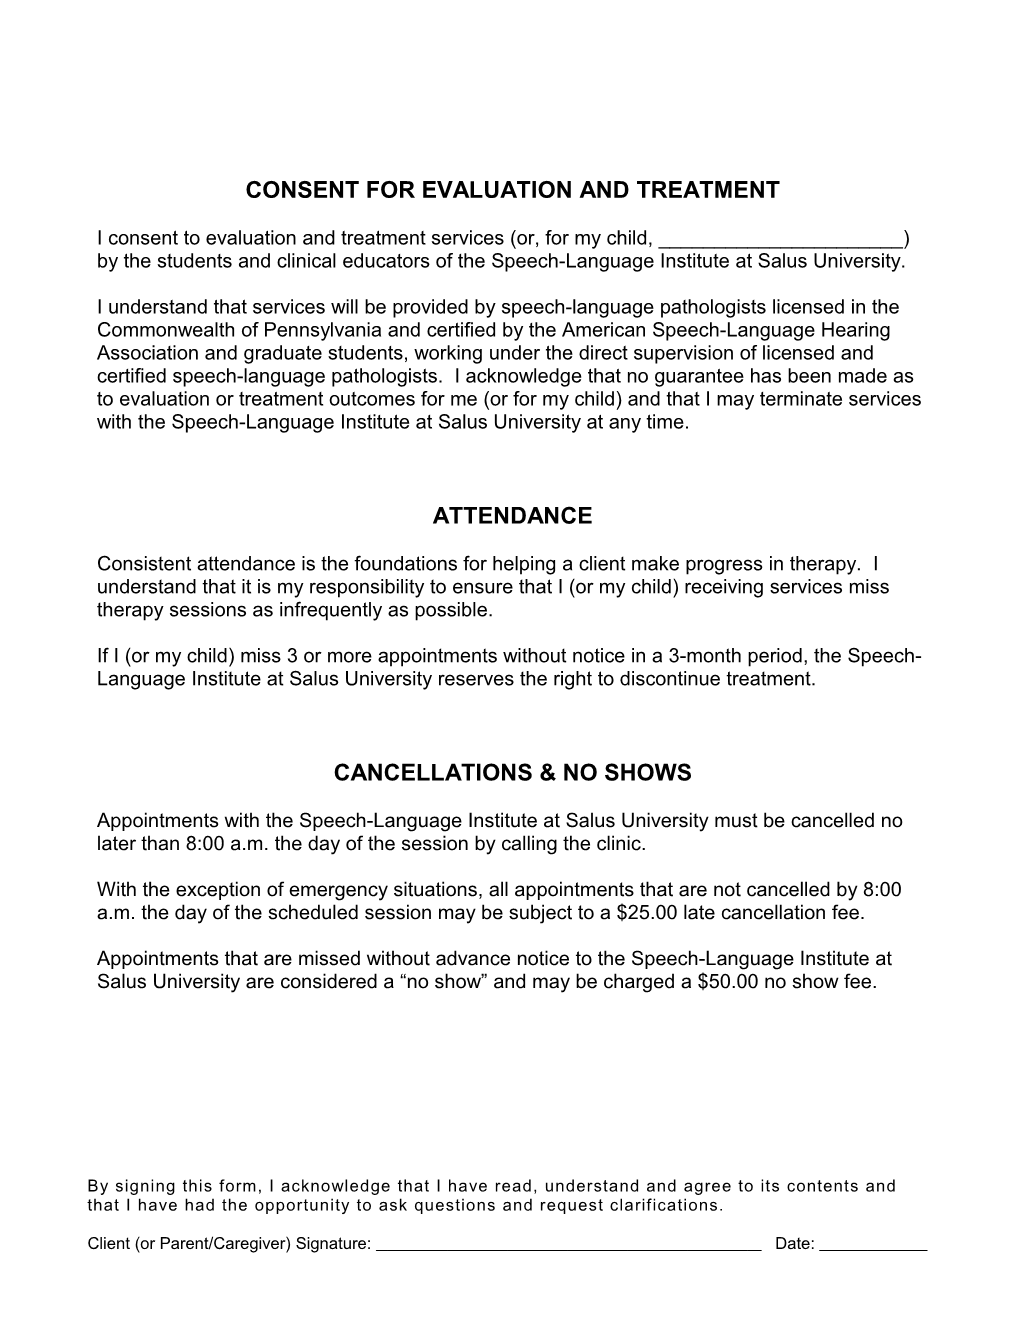 Consent for Evaluation and Treatment